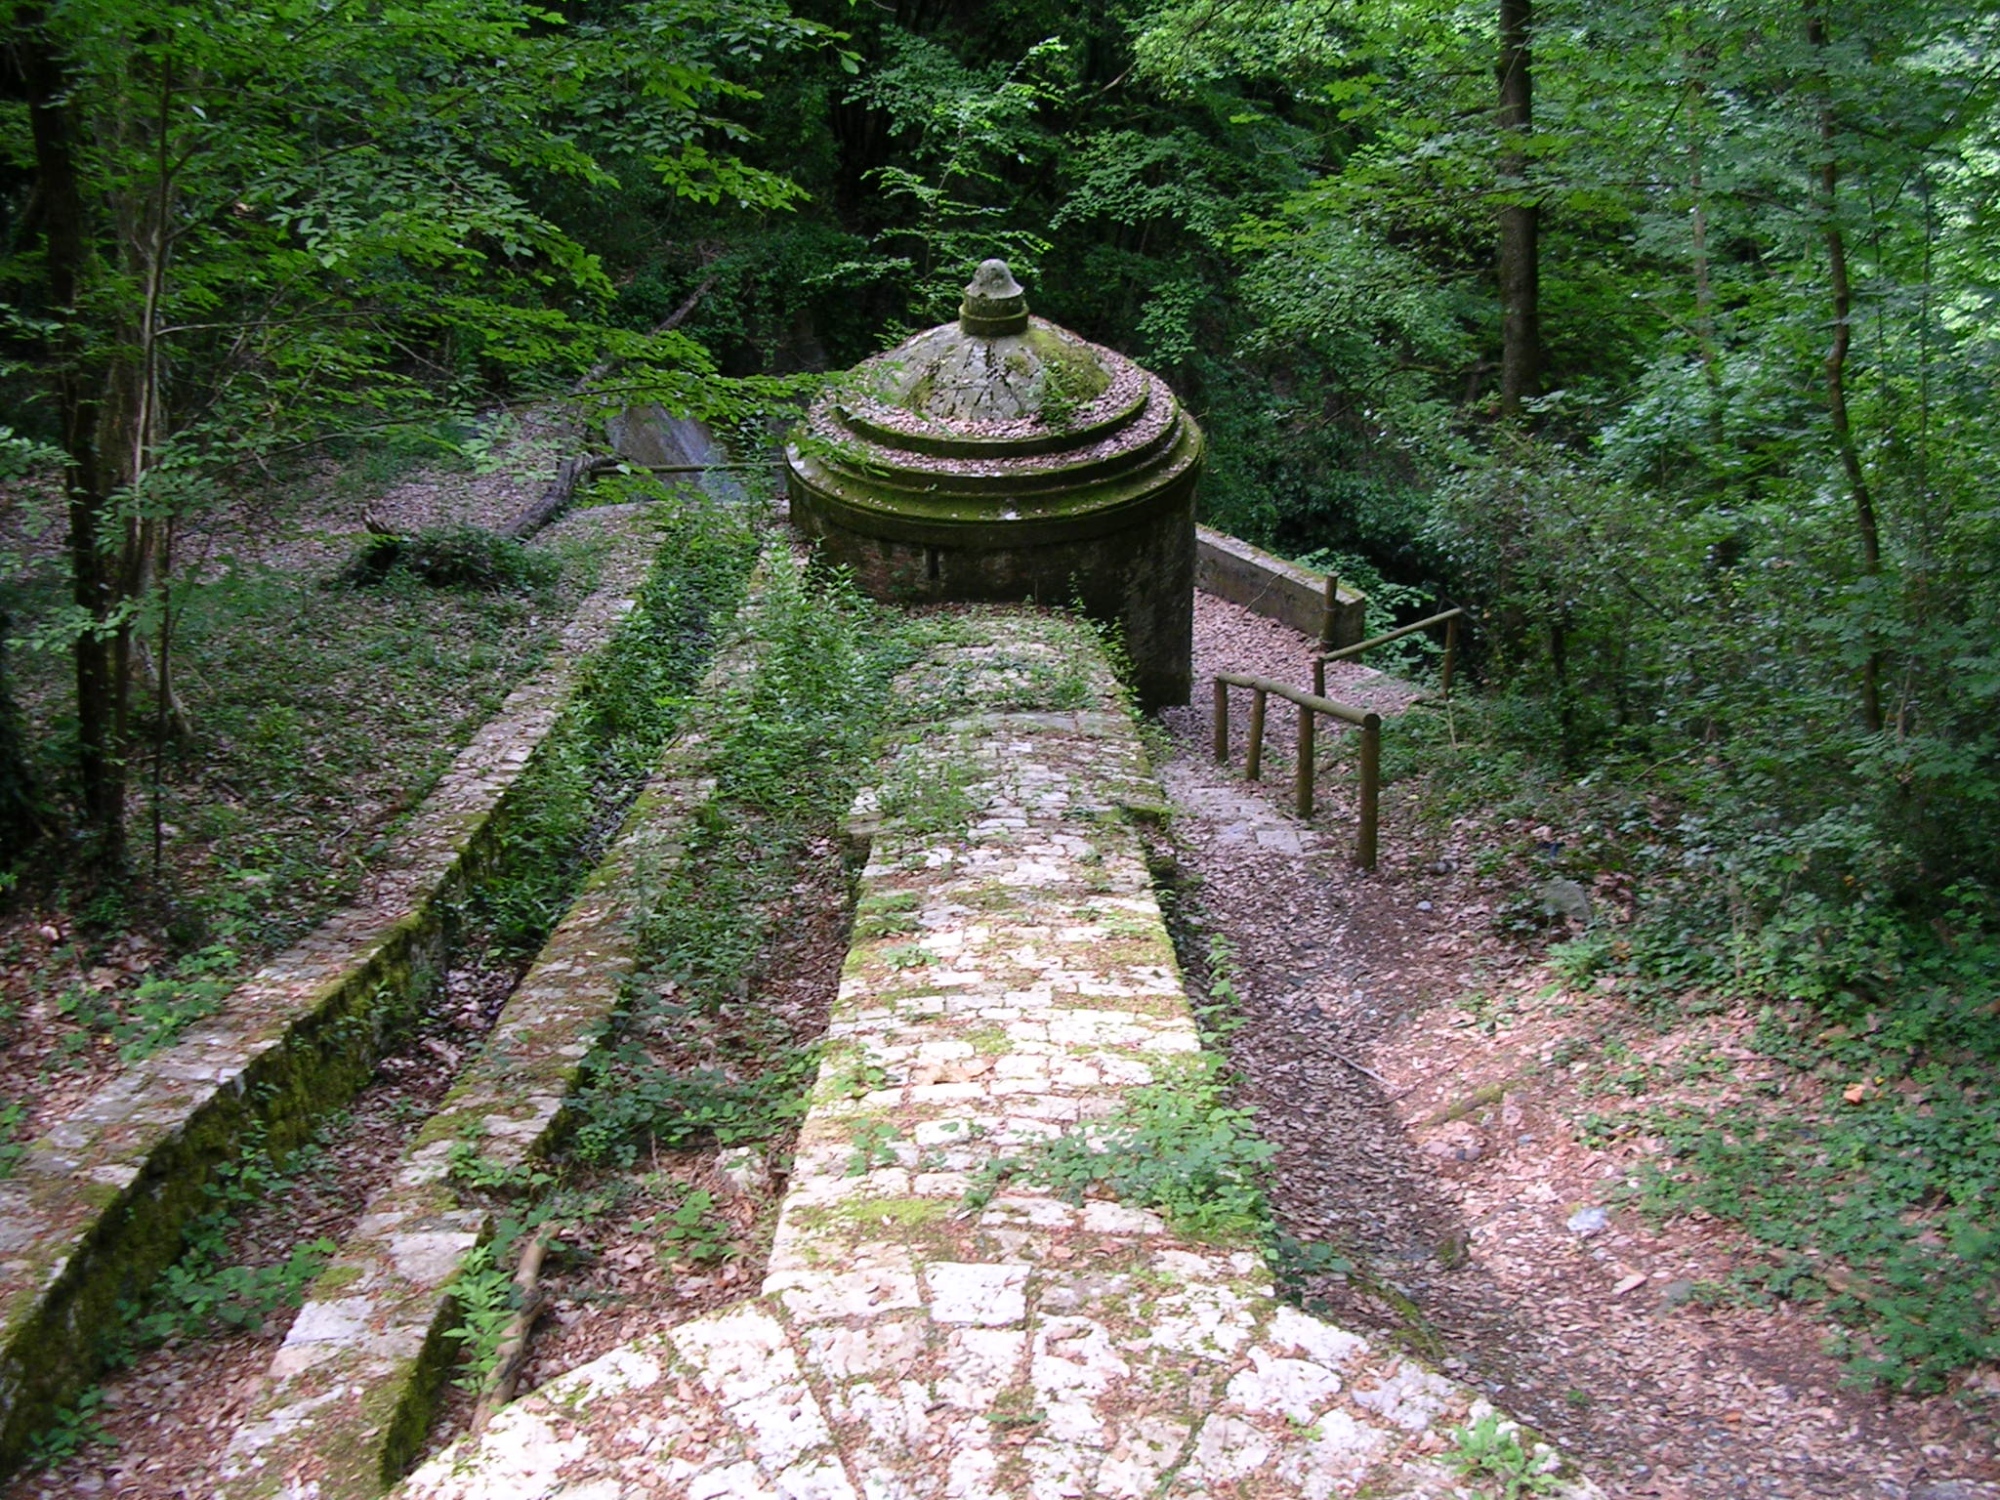 The springs where the aqueduct gets its water